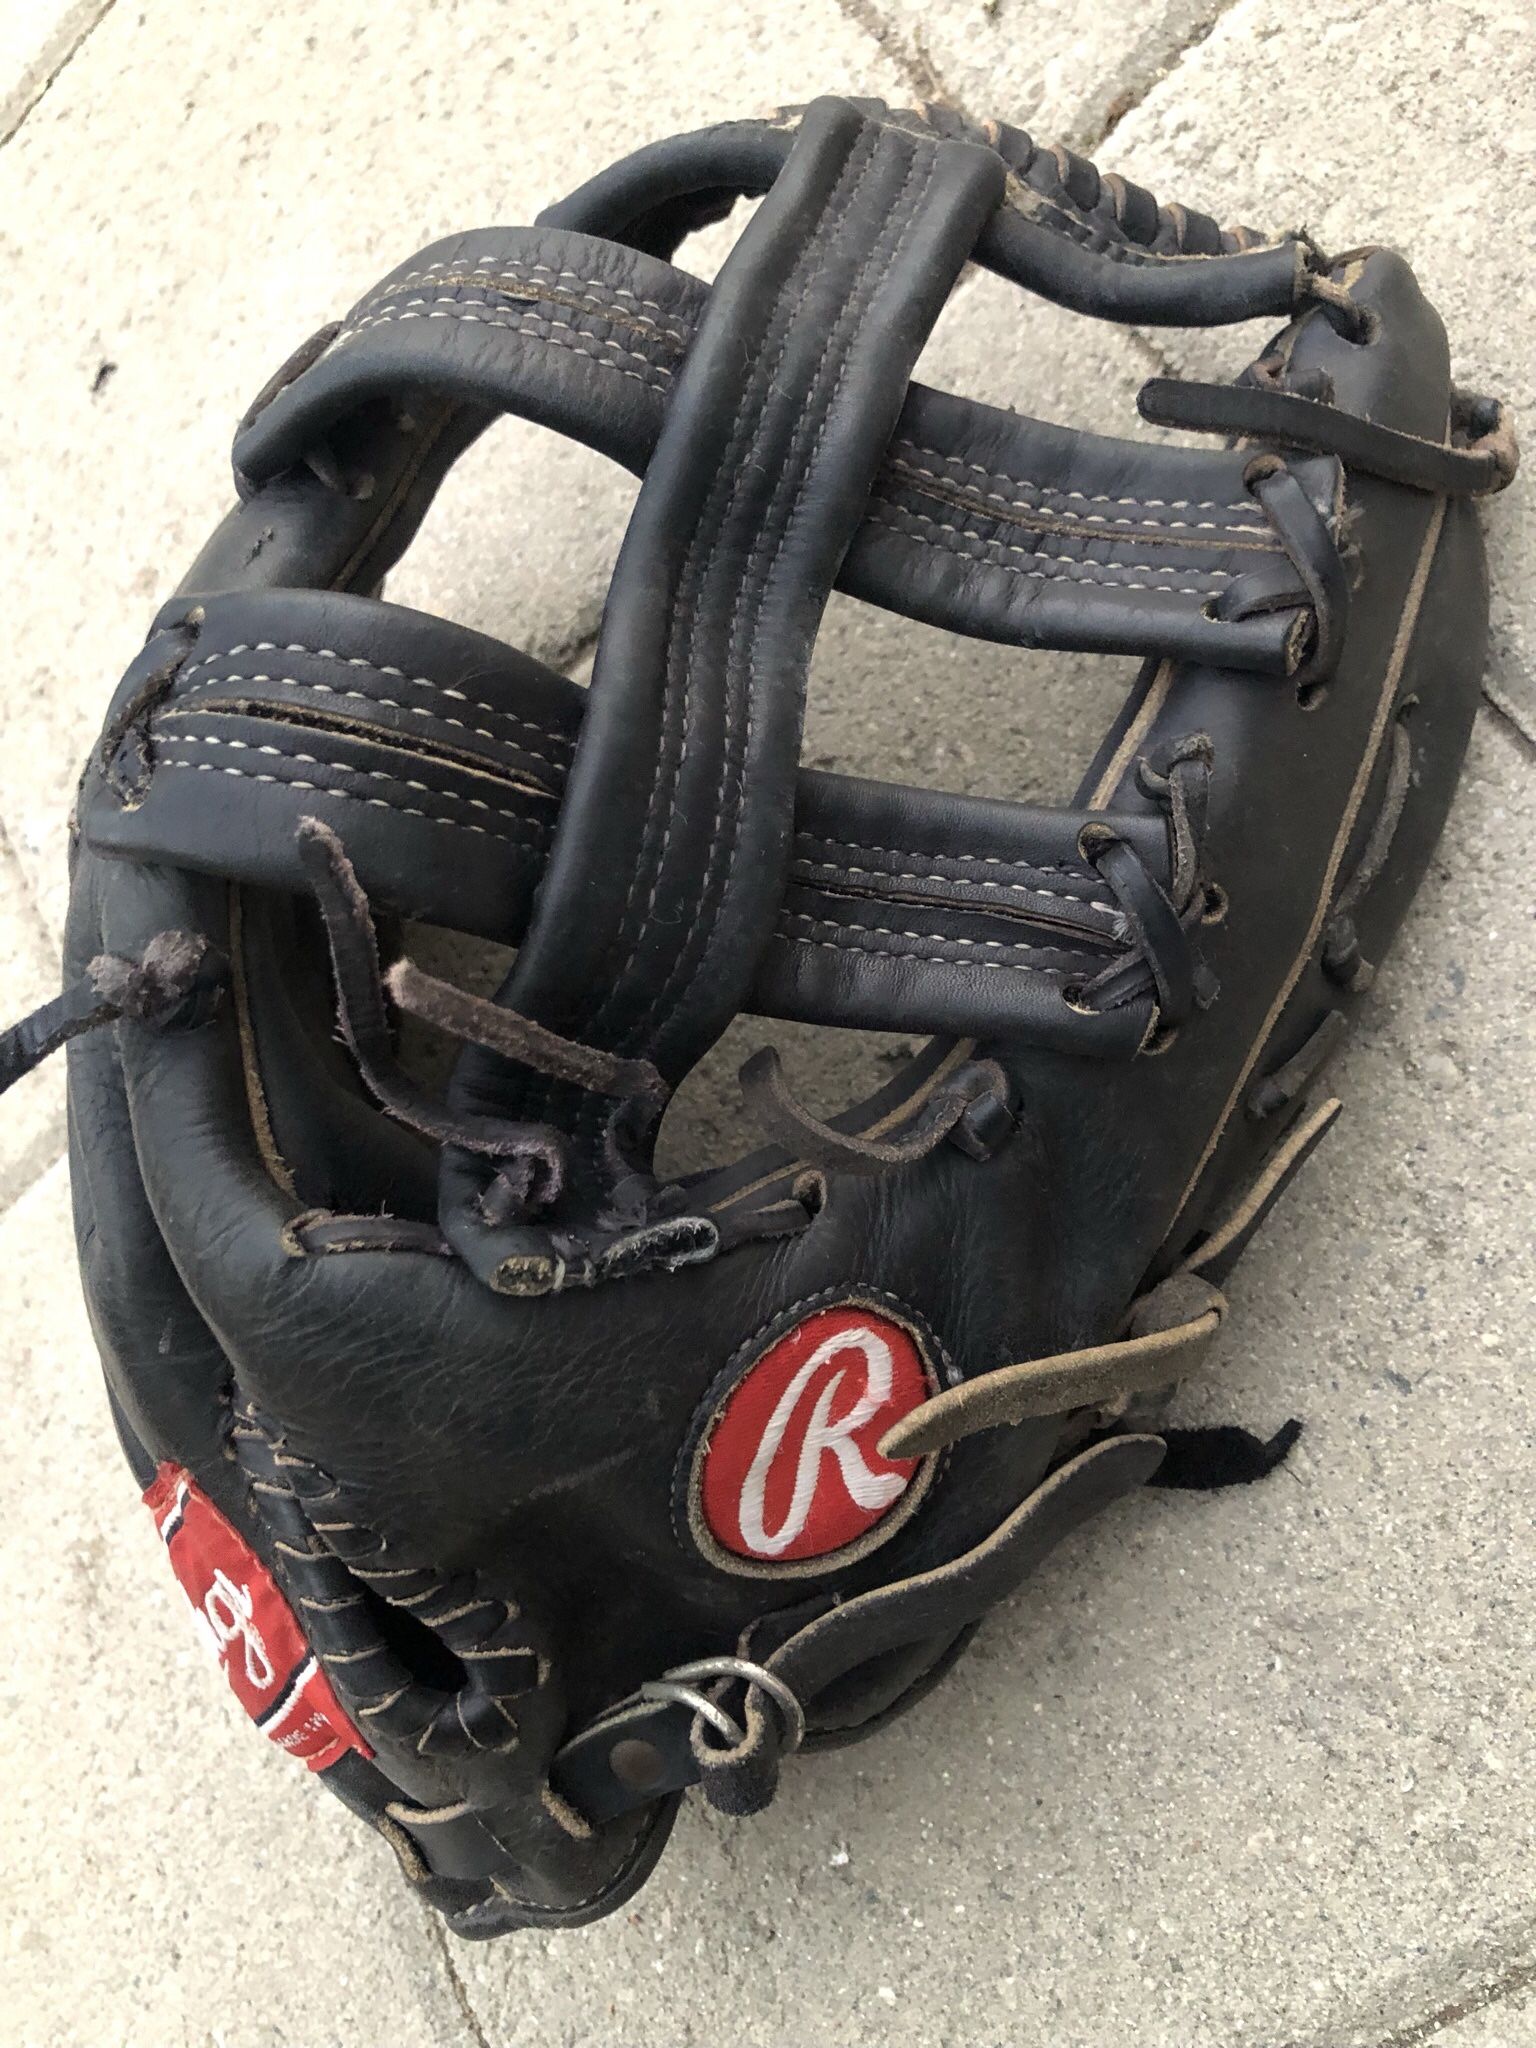 Rawlings  Baseball Glove  Softball Glove  Quality Made In The USA Have More Equipment